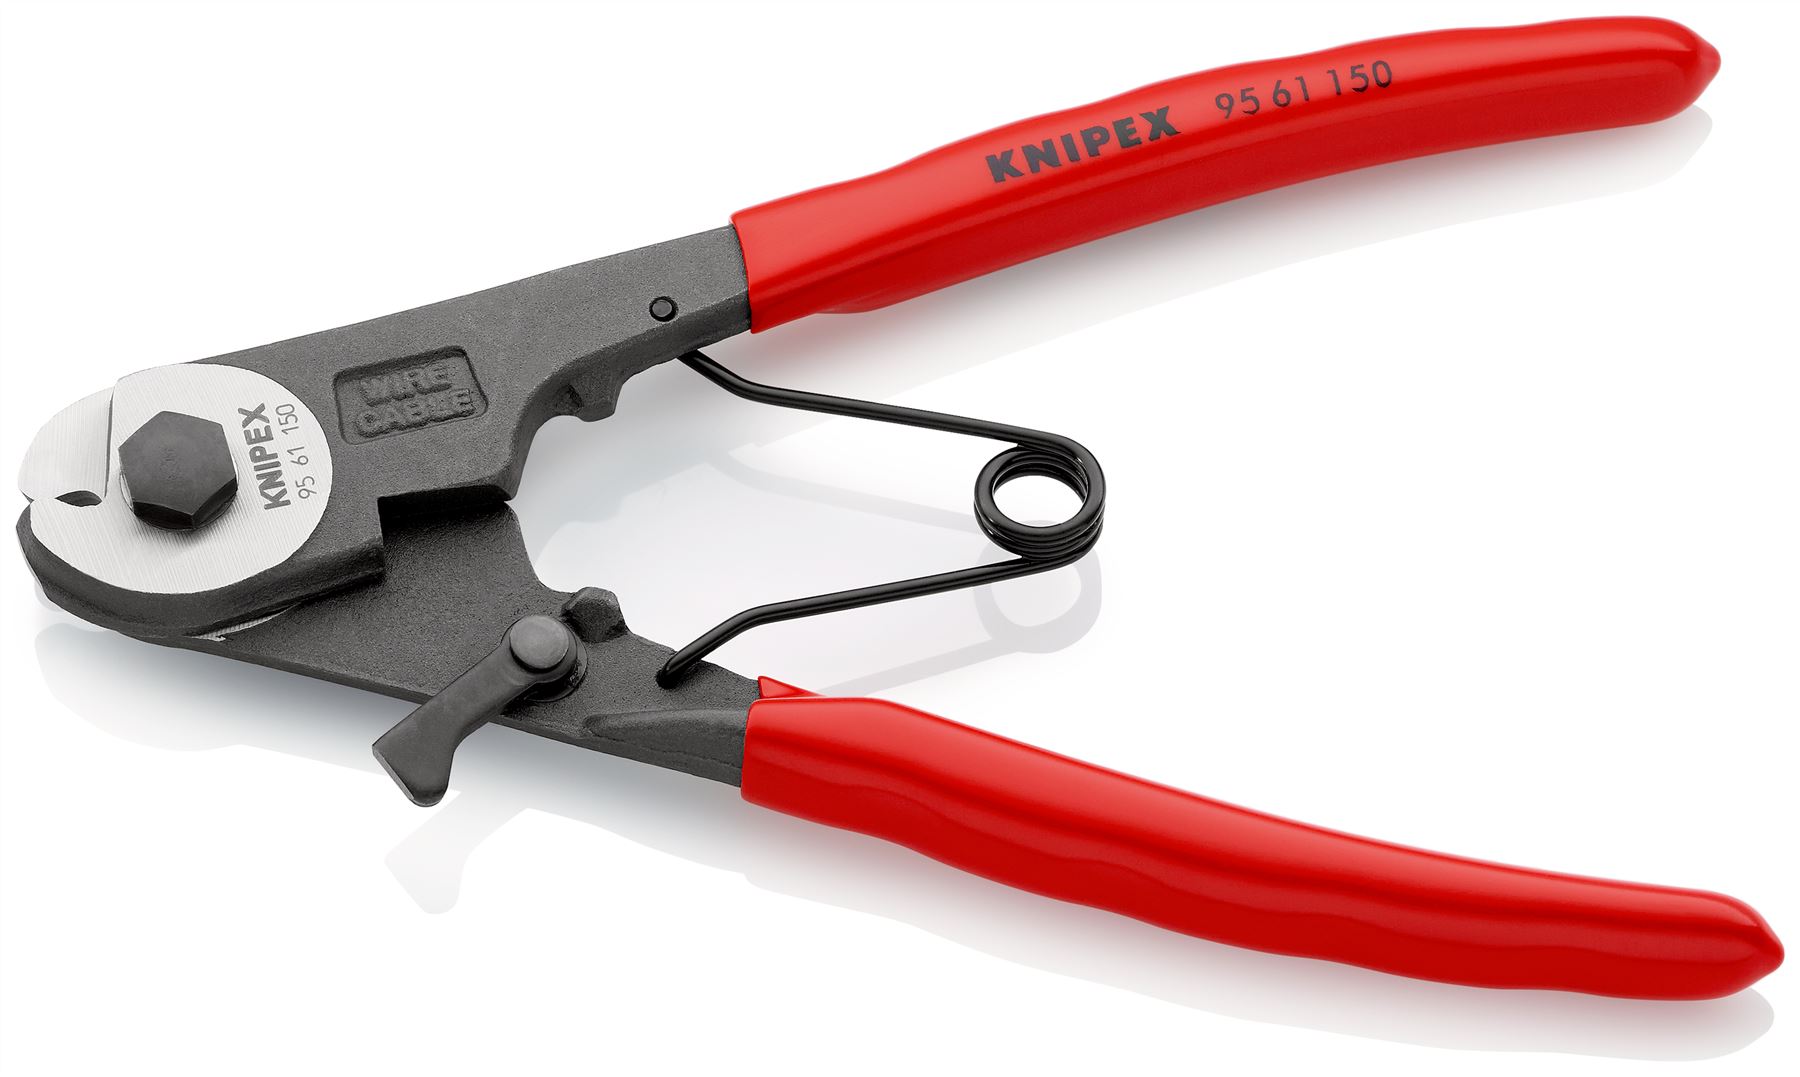 KNIPEX Bowden Cable Cutter Wire Rope Cutting Pliers 150mm Plastic Coated Handles 95 61 150